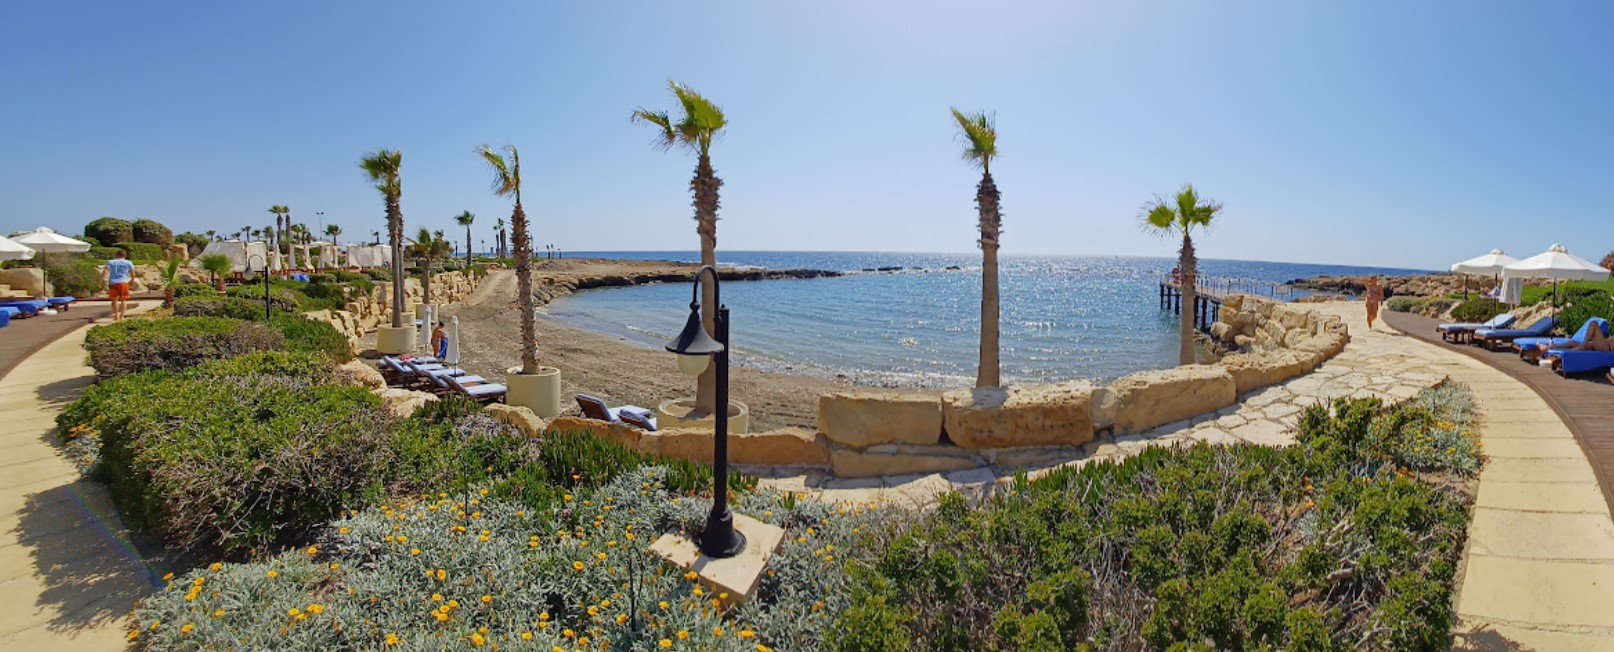 image Paphos hotels able to meet winter demand